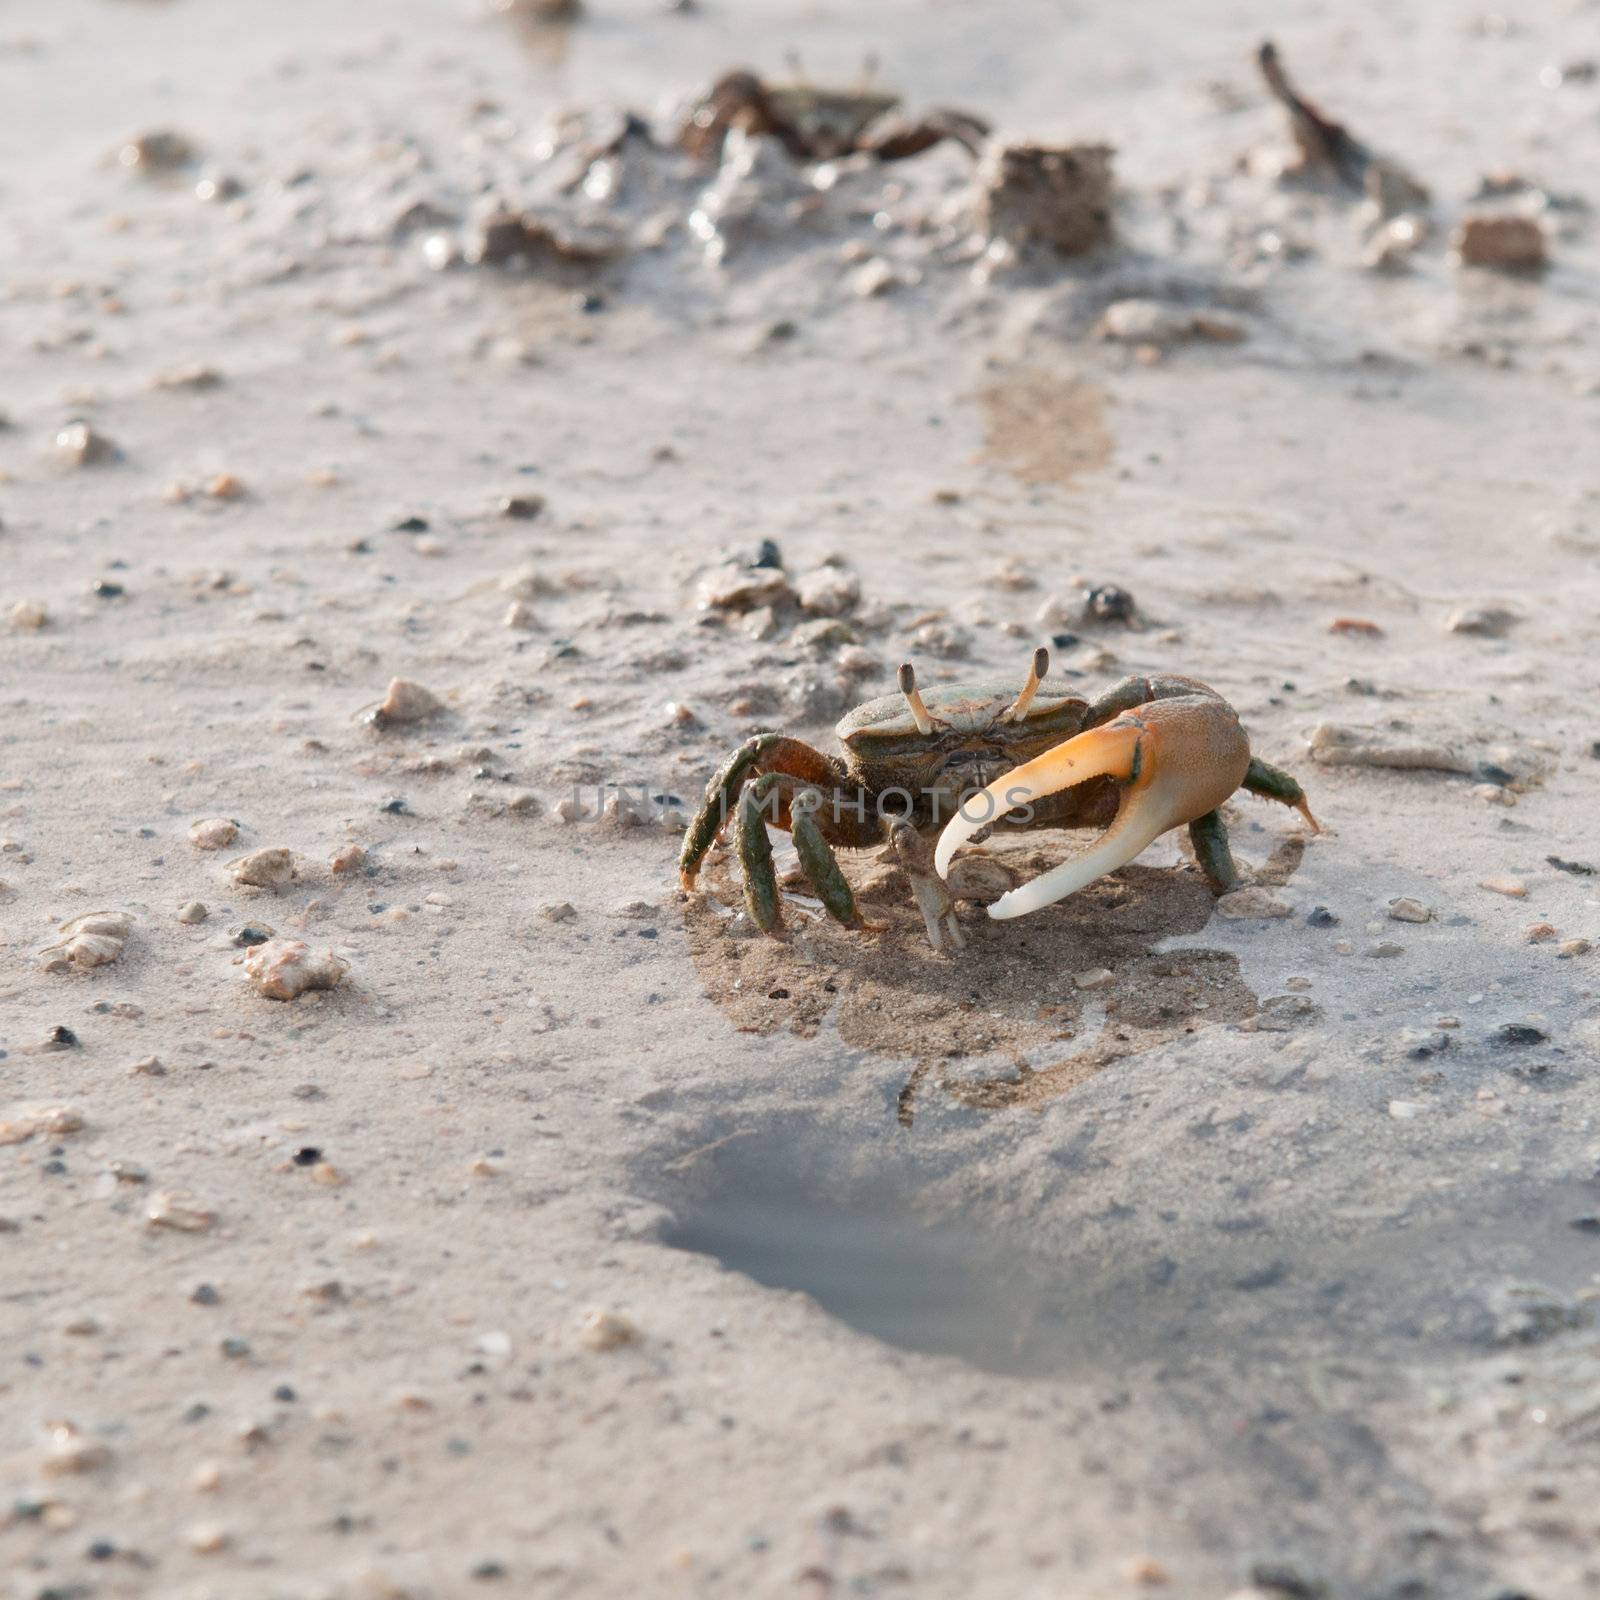 Crab protecting hole by luissantos84